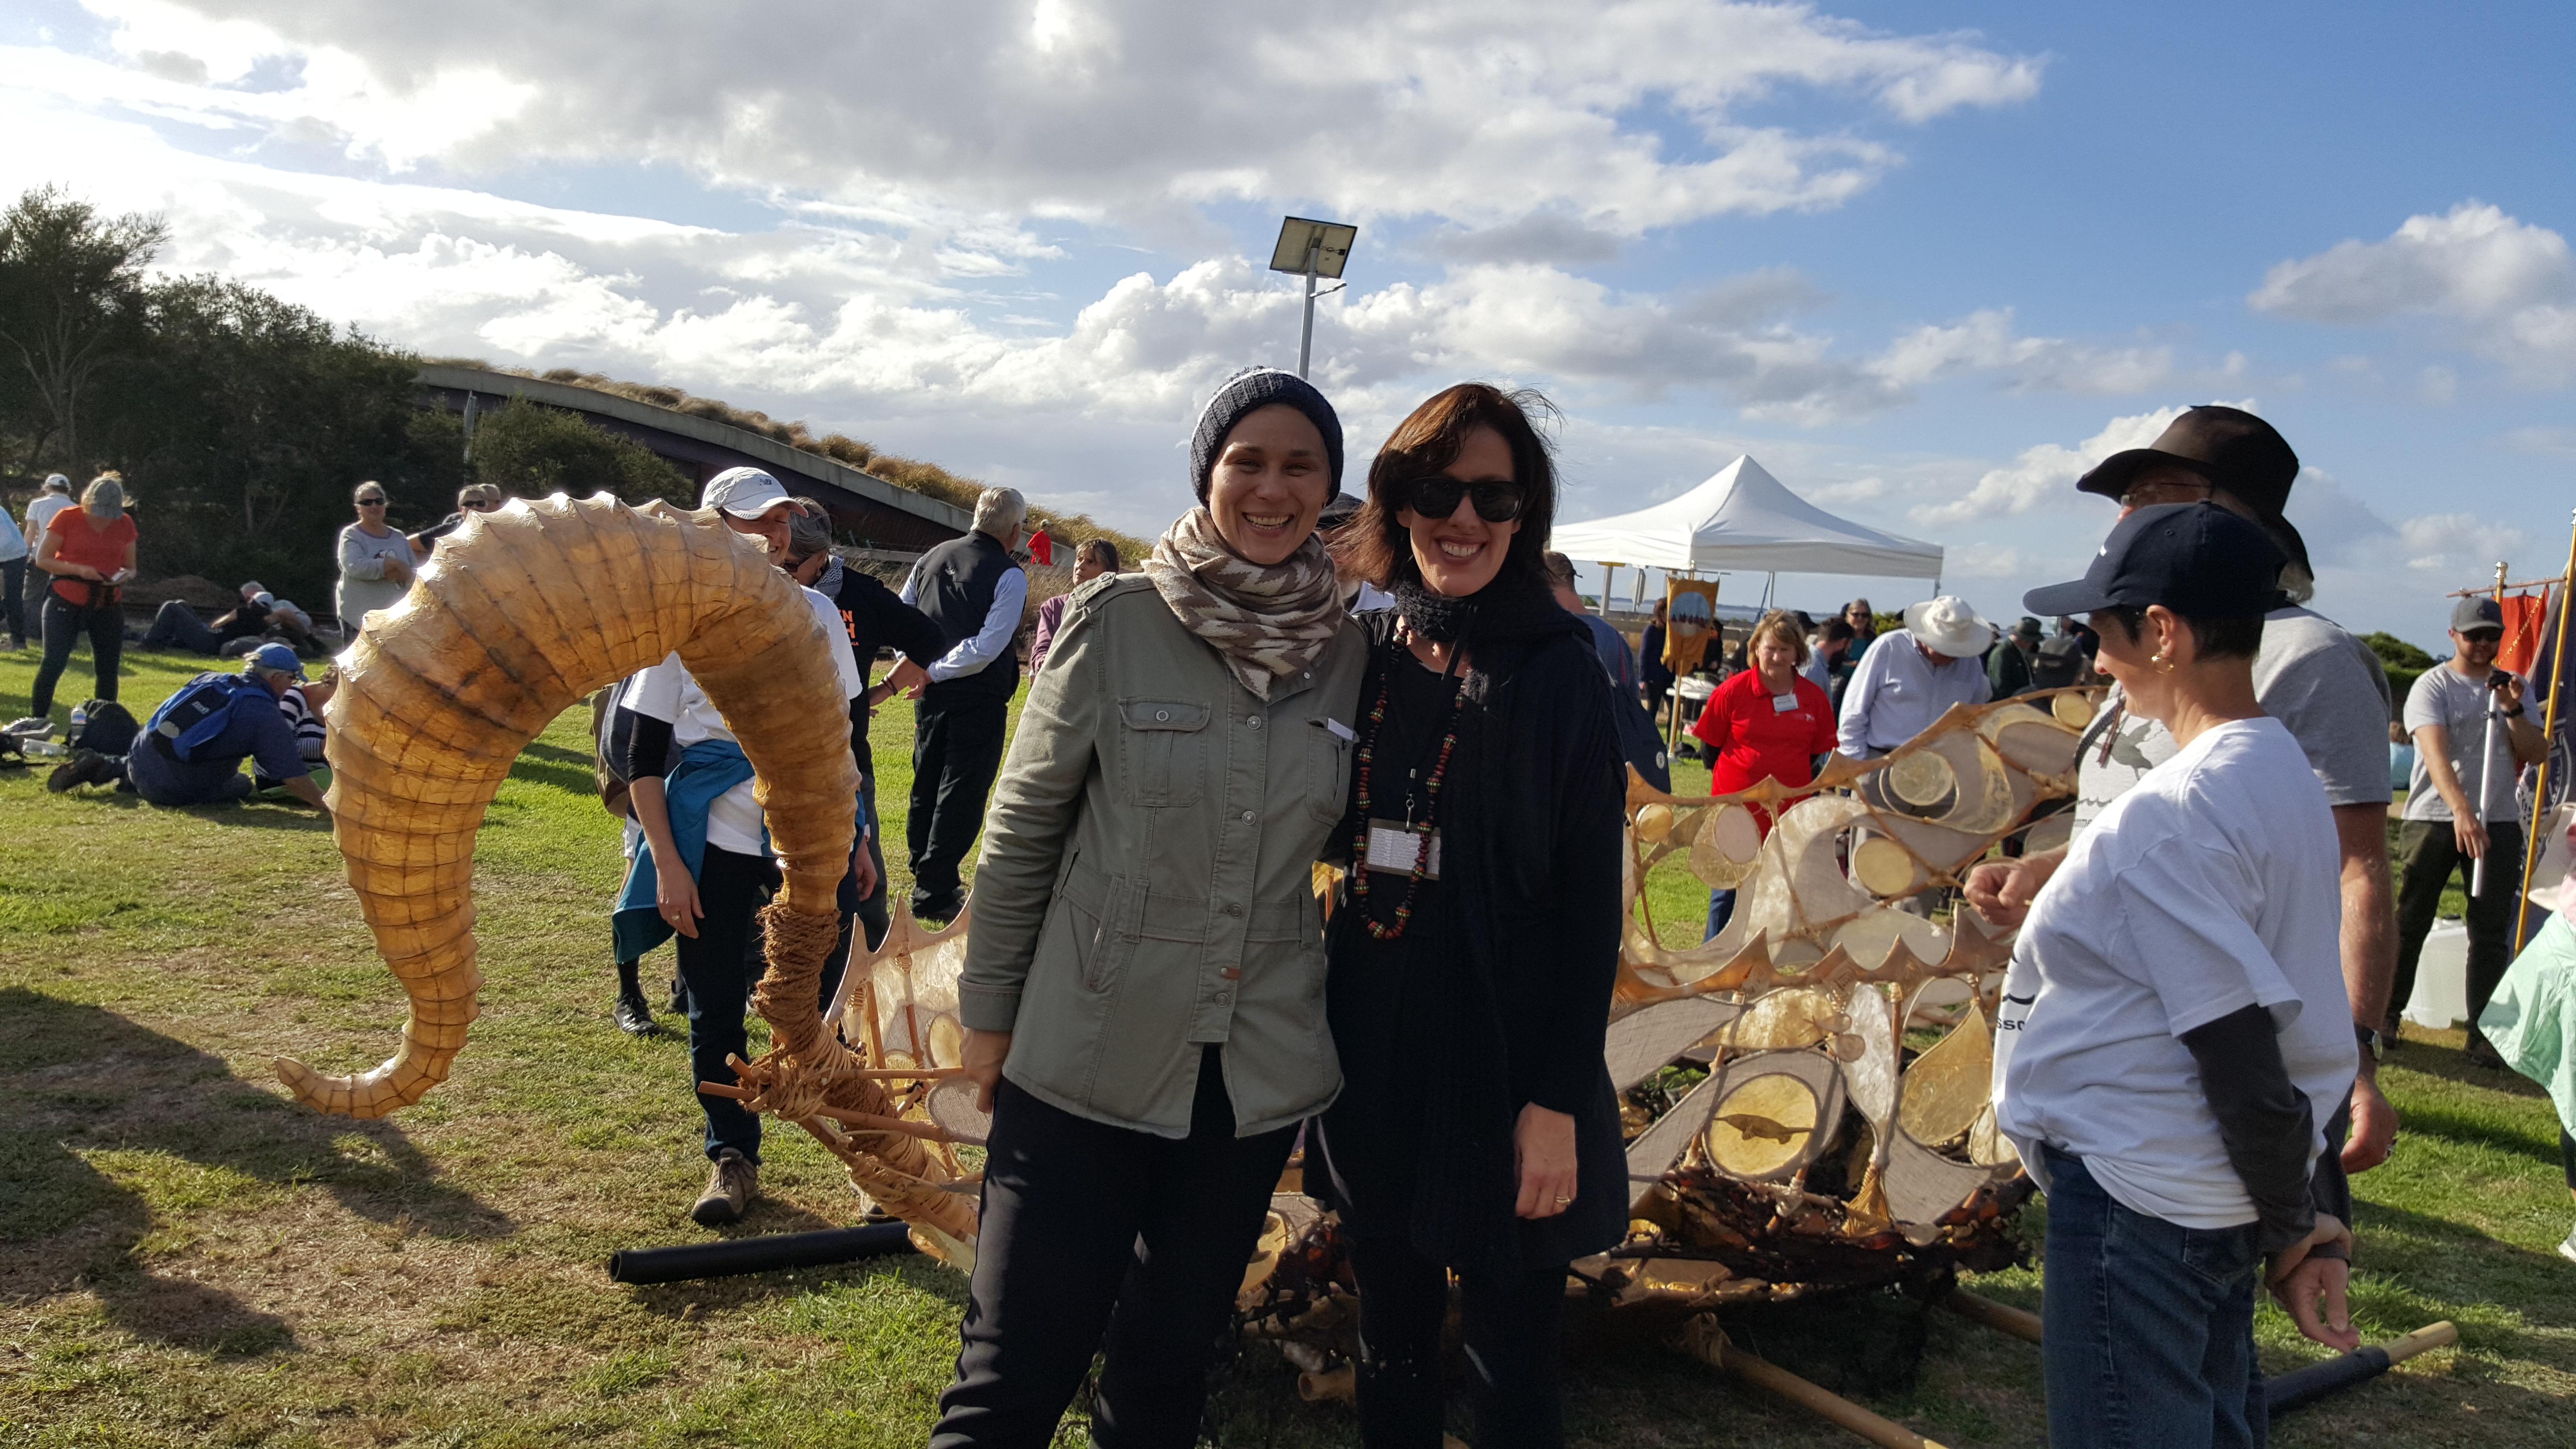 Canoe sculptors Leslie Pearson (USA) and Kerrie Bedson.